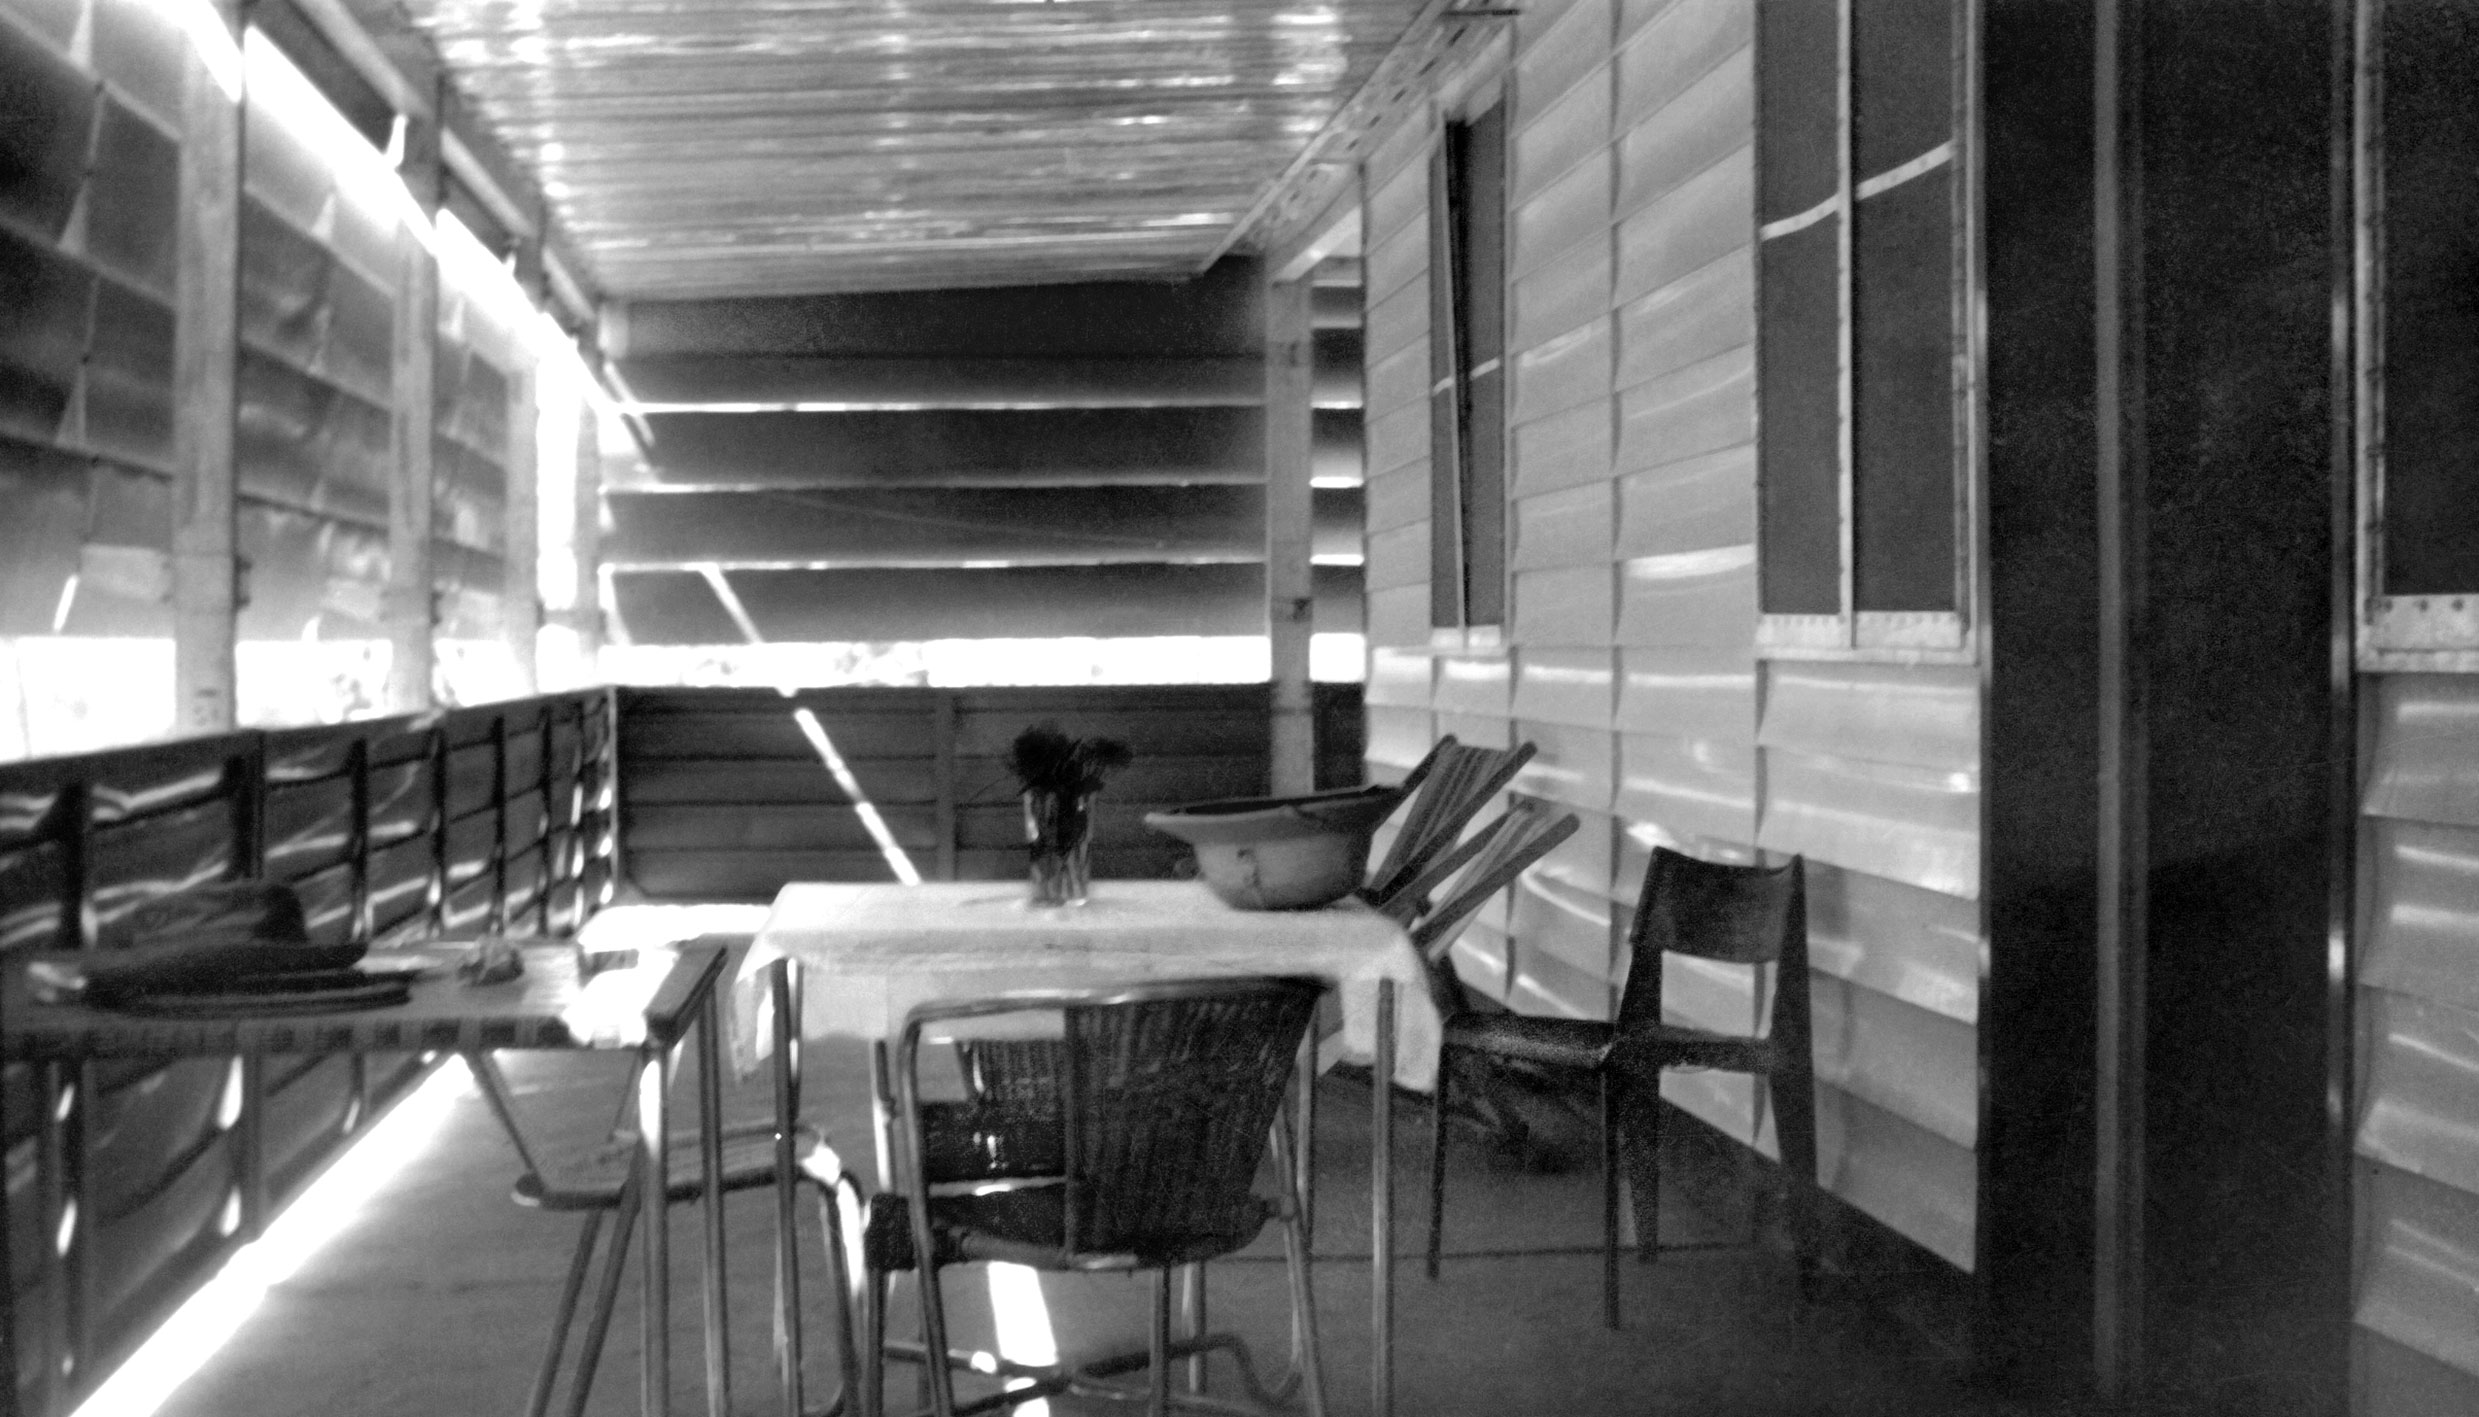 Prefabricated house for the OPEC firm, Niamey. Outdoor gallery equipped with Ateliers Jean Prouvé brise-soleil and a Cafétéria no. 300 chair, Tropique variant for French overseas territories, undated.